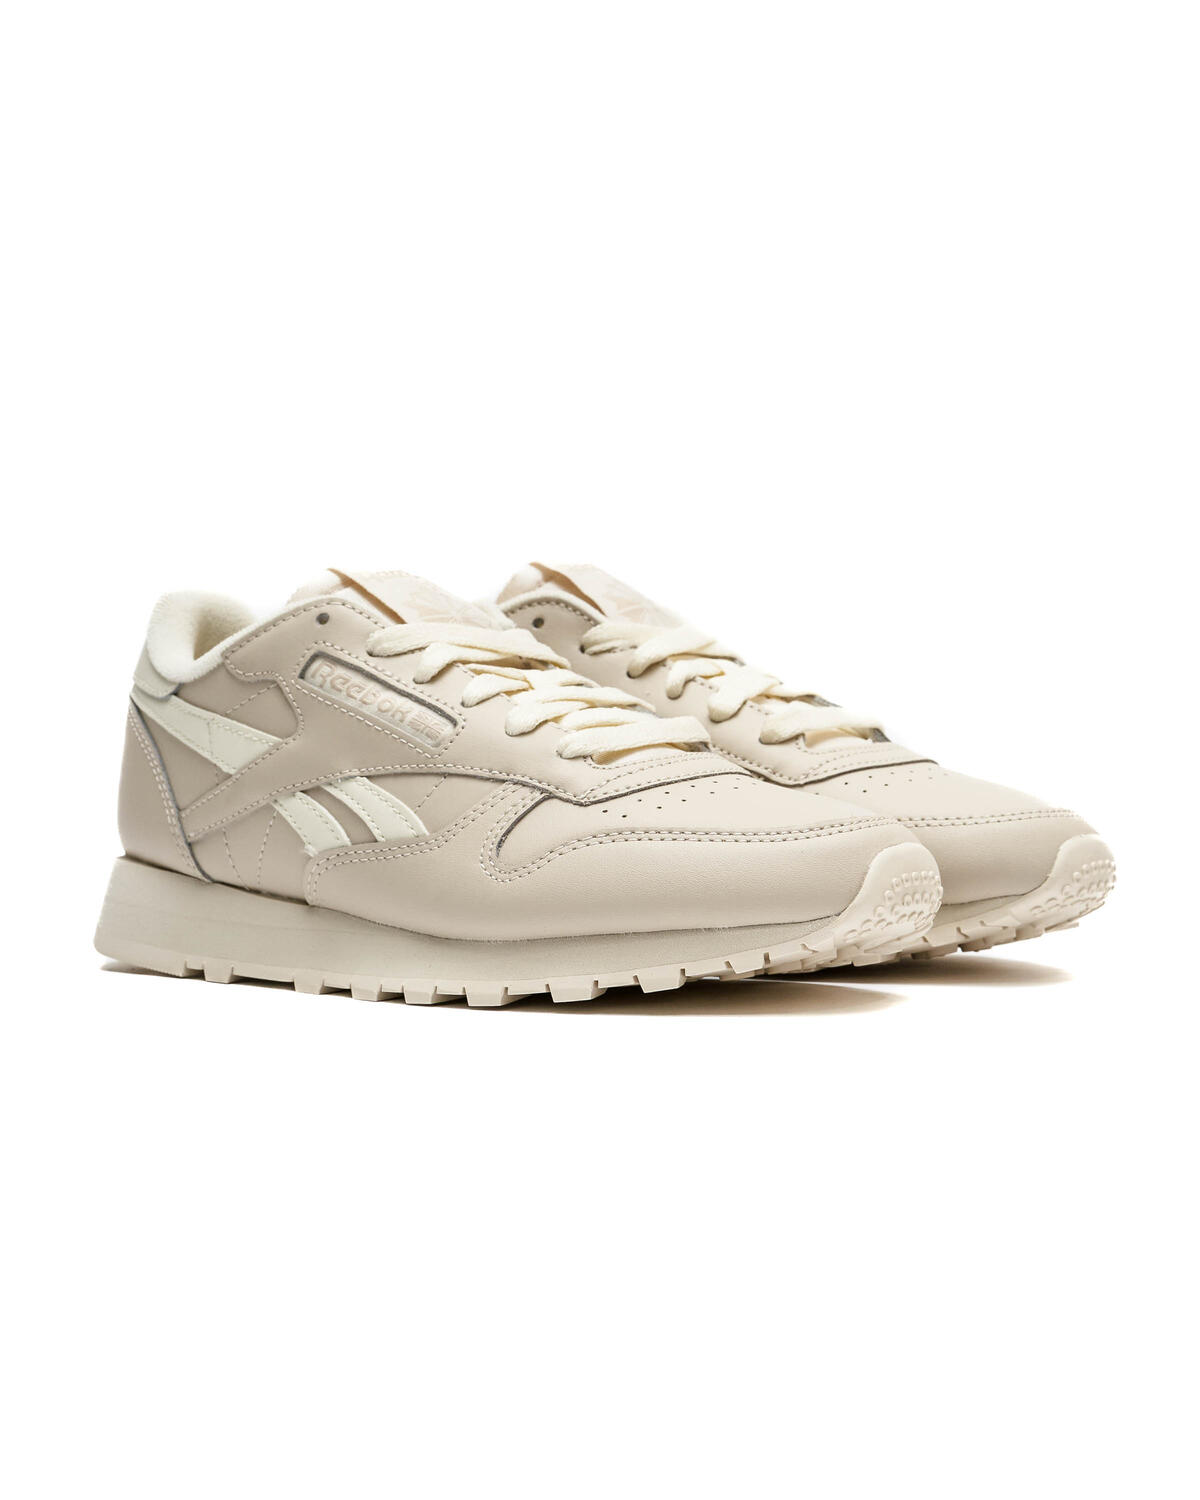 AFEW WMNS CLASSIC | LEATHER Reebok IG9481 | STORE